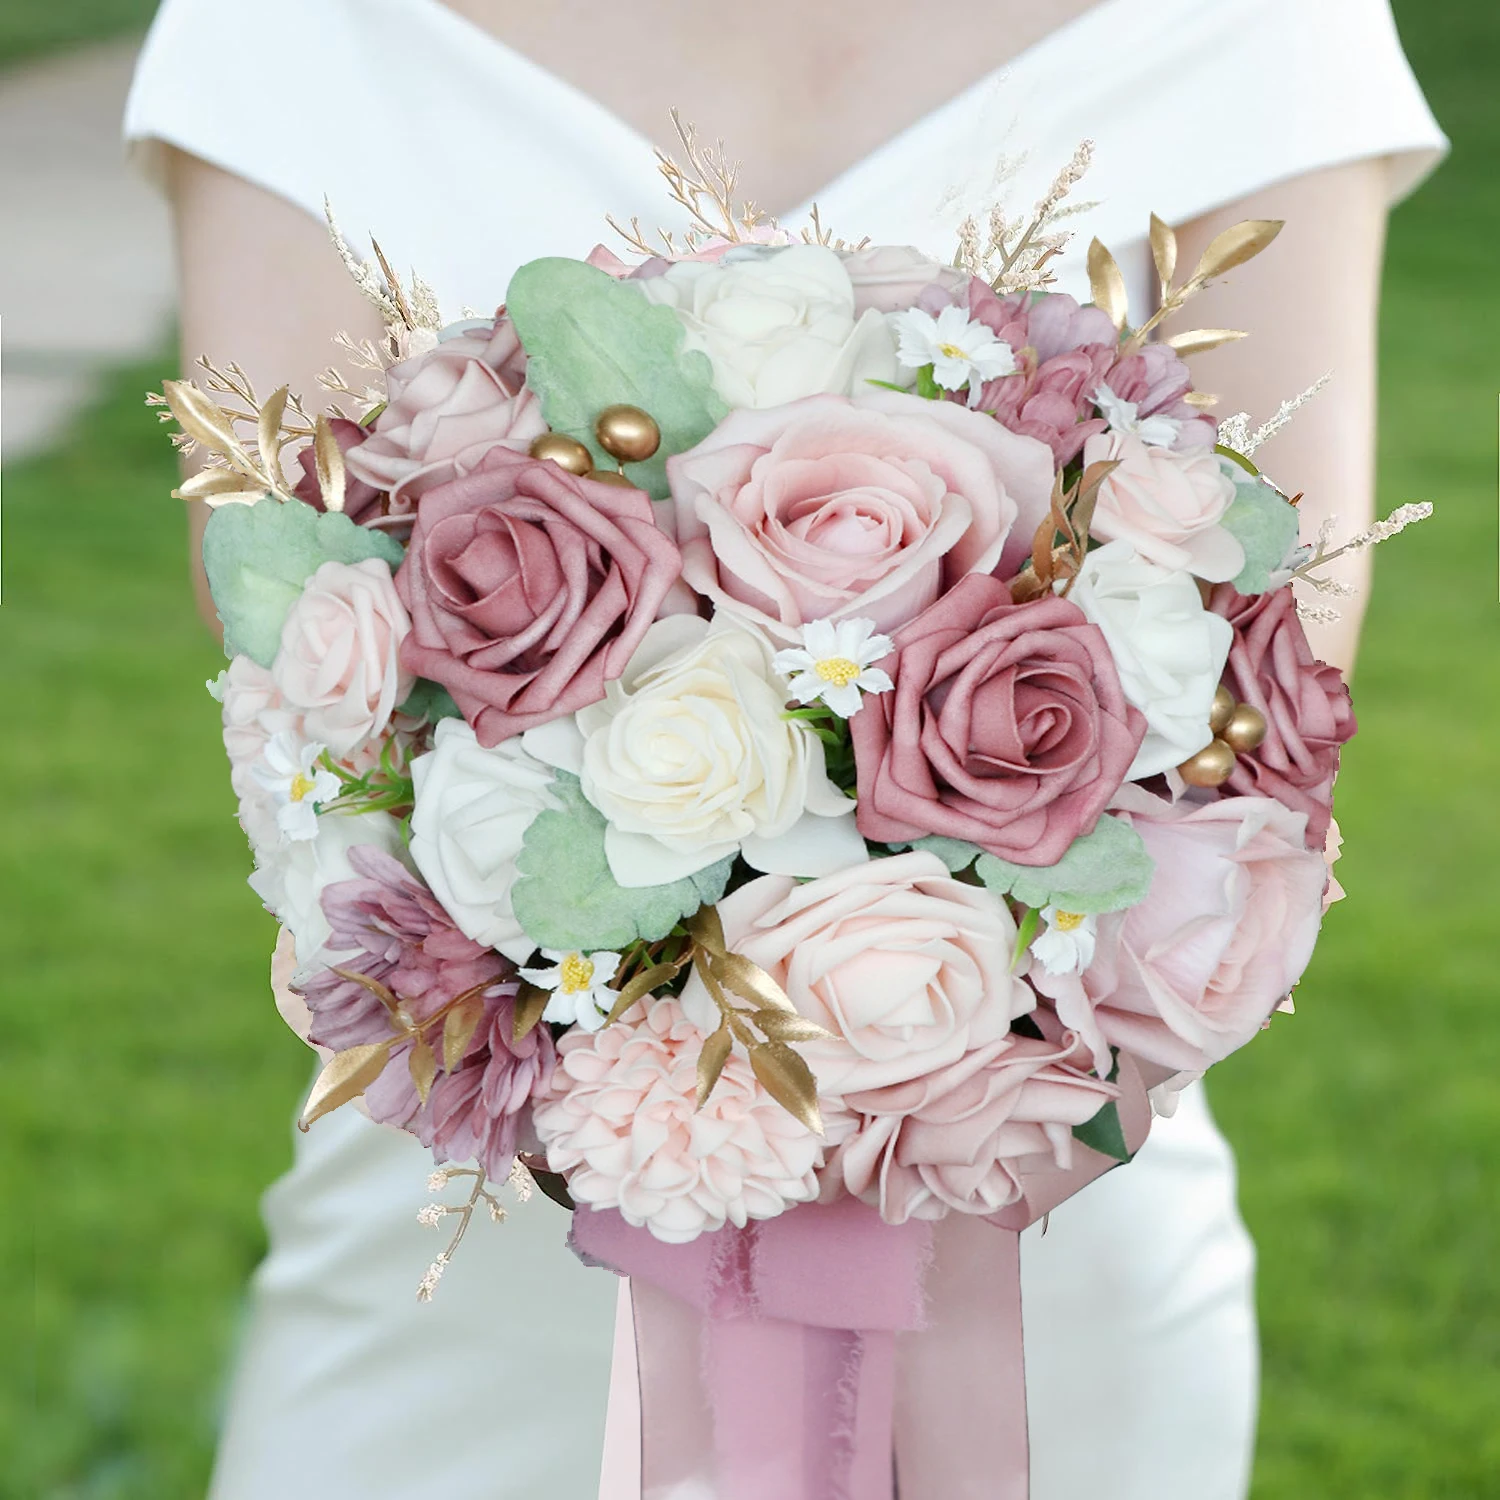 

Yannew Dusty Rose Artificial Flower Bridal Bouquets for Bride Tossing Bouquet Rustic Wedding Ceremony Anniversary Decoration